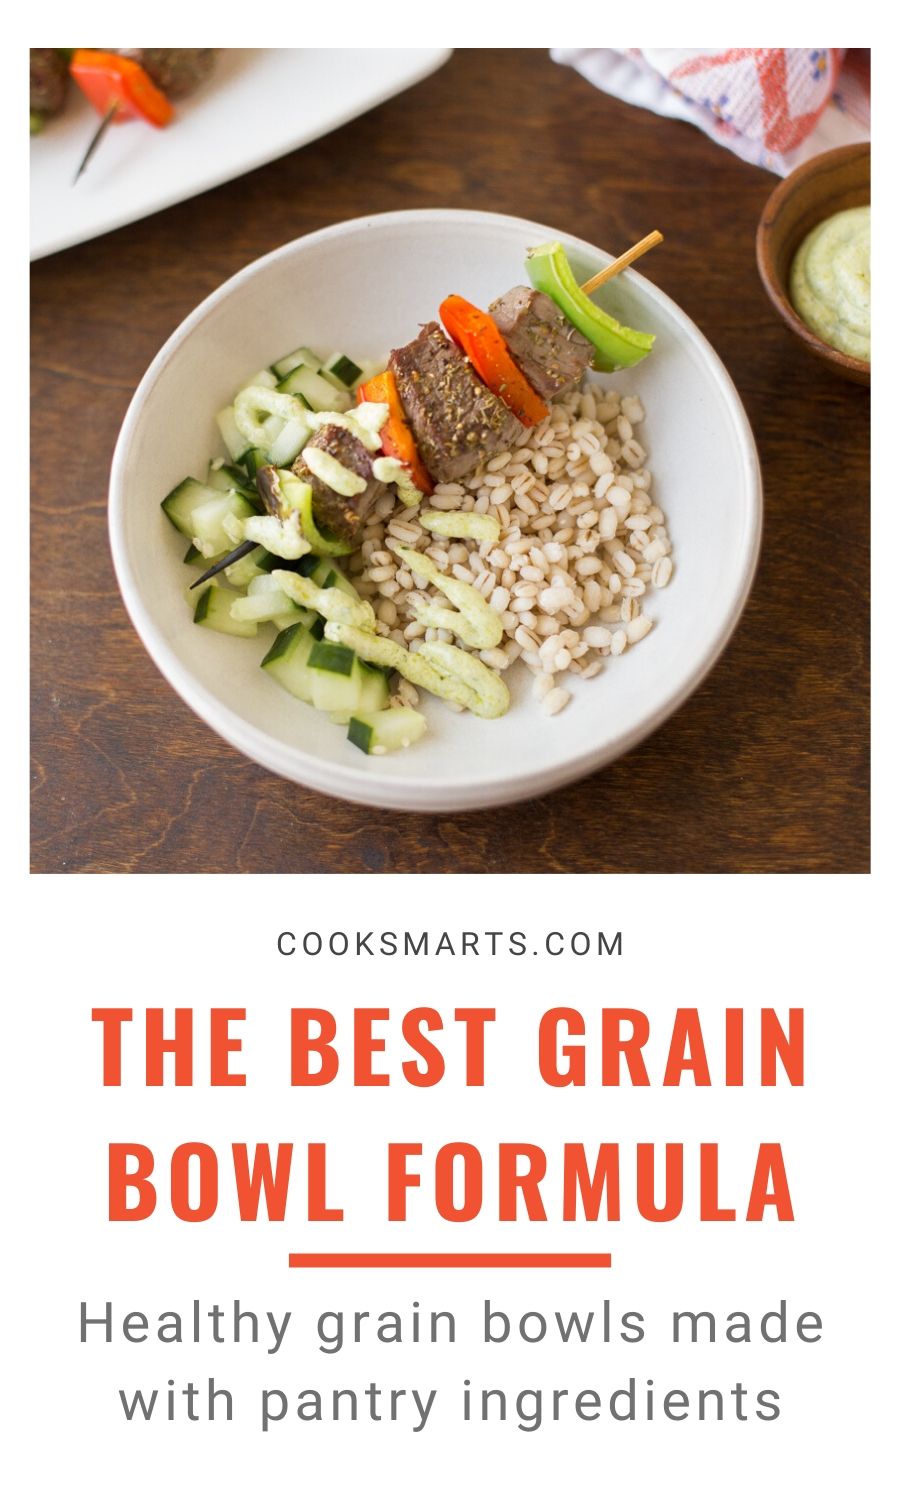 How to Make Grain Bowls | Cook Smarts